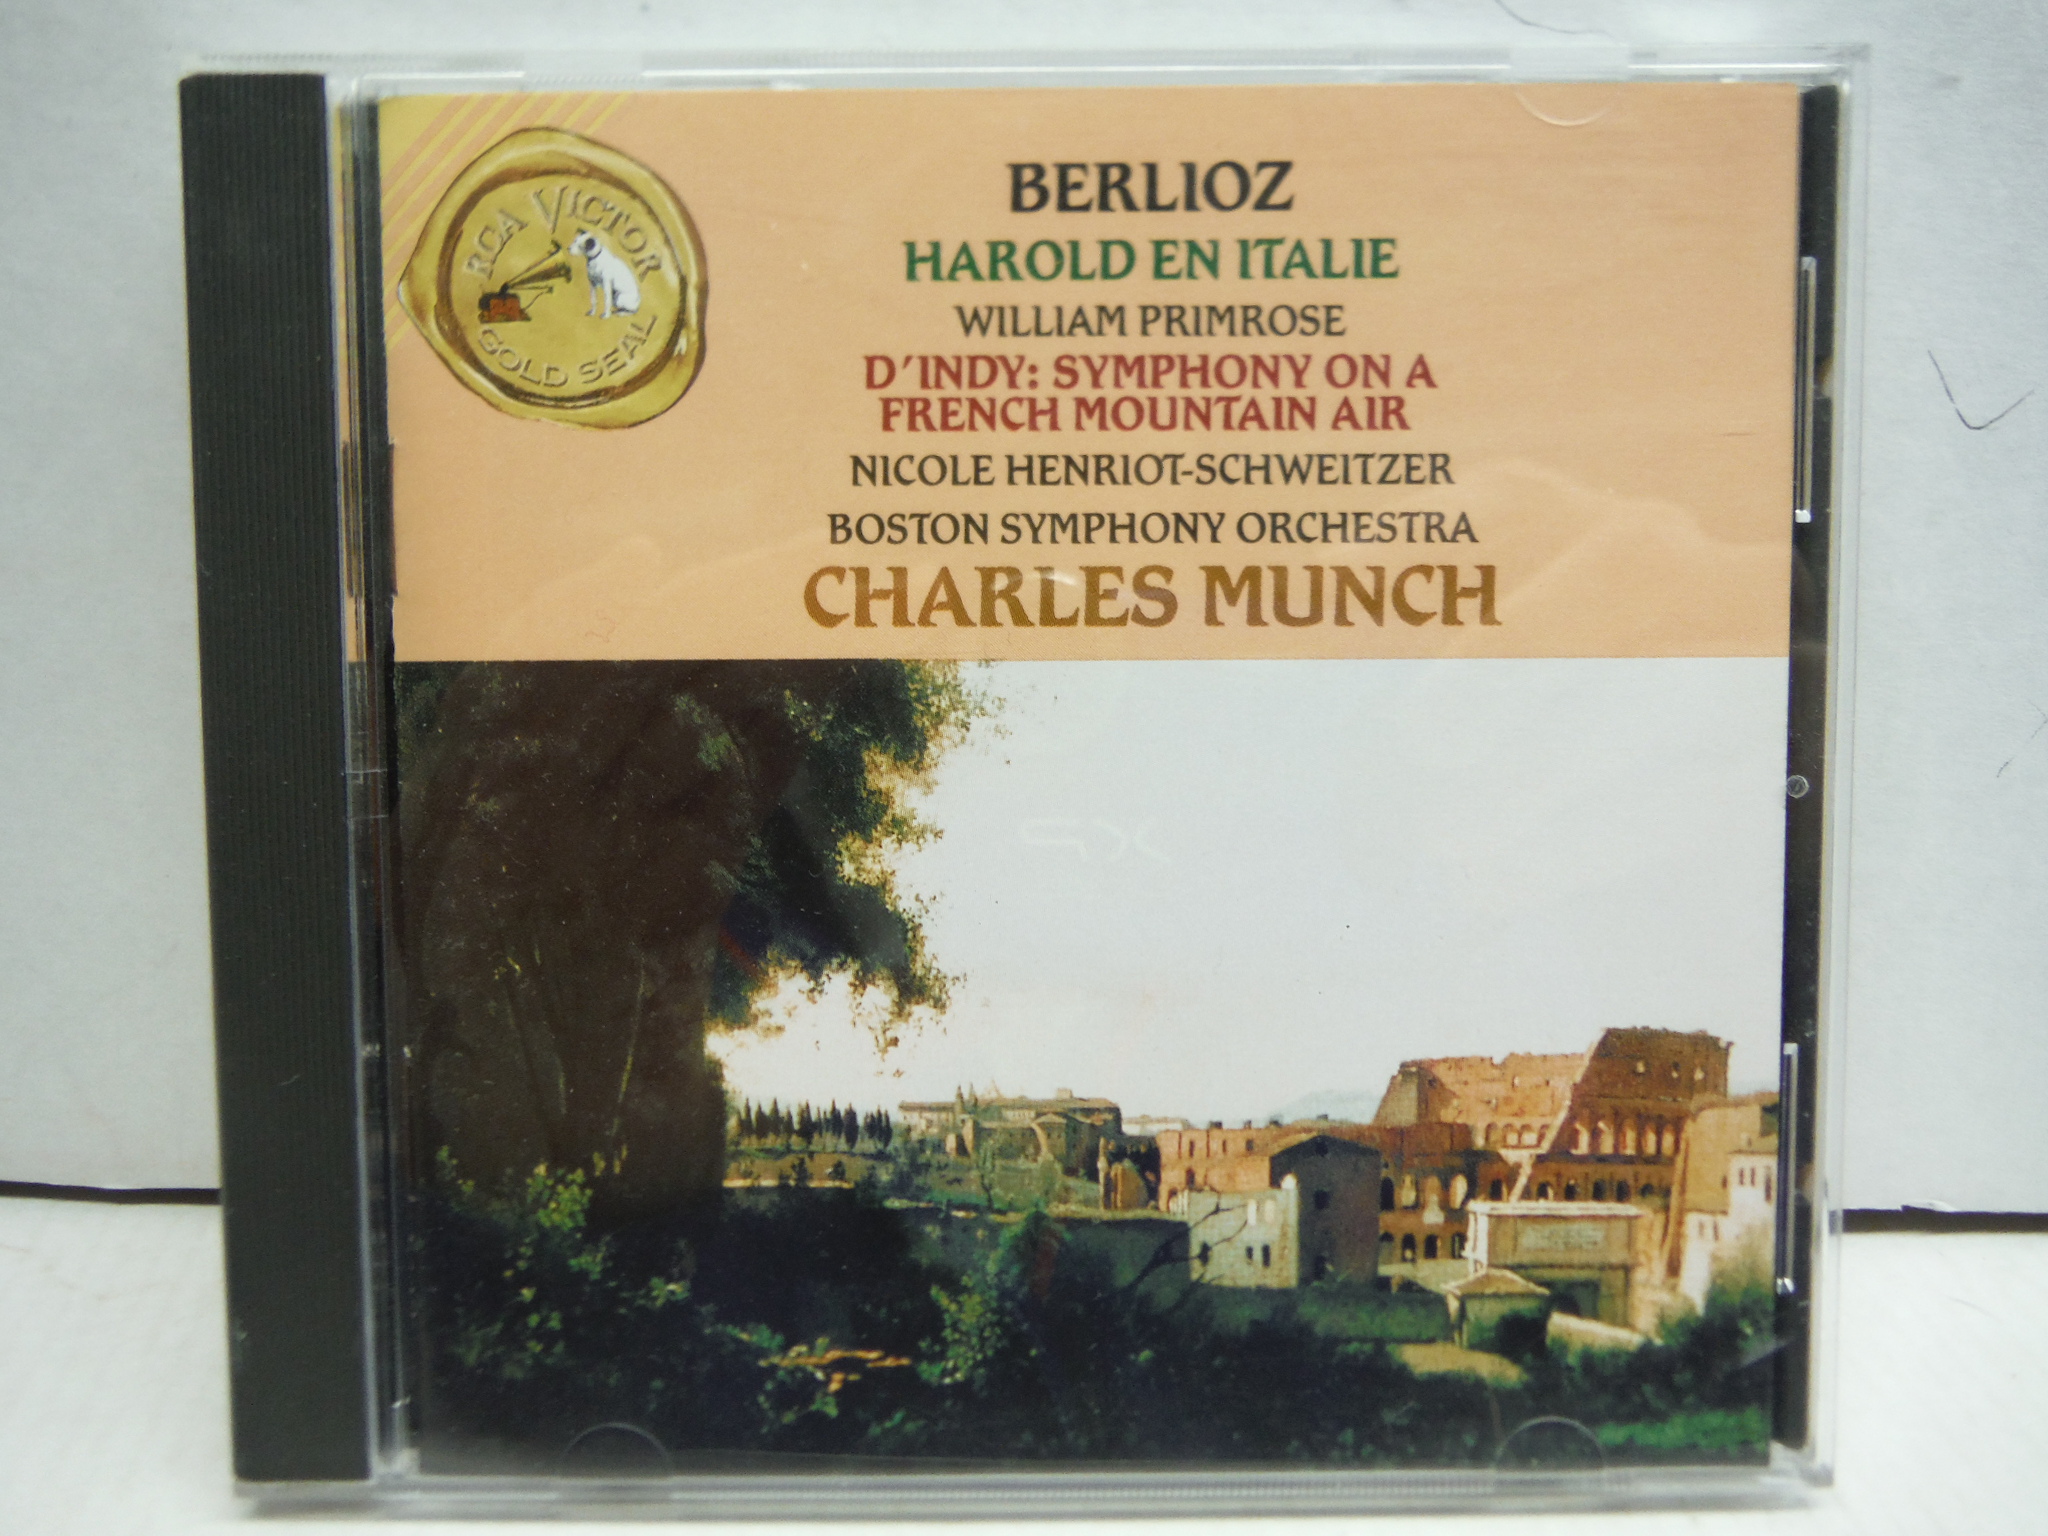 Berlioz: Harold in Italy Opus 16 ; d'Indy: Symphony on a French Mountain Air Opu